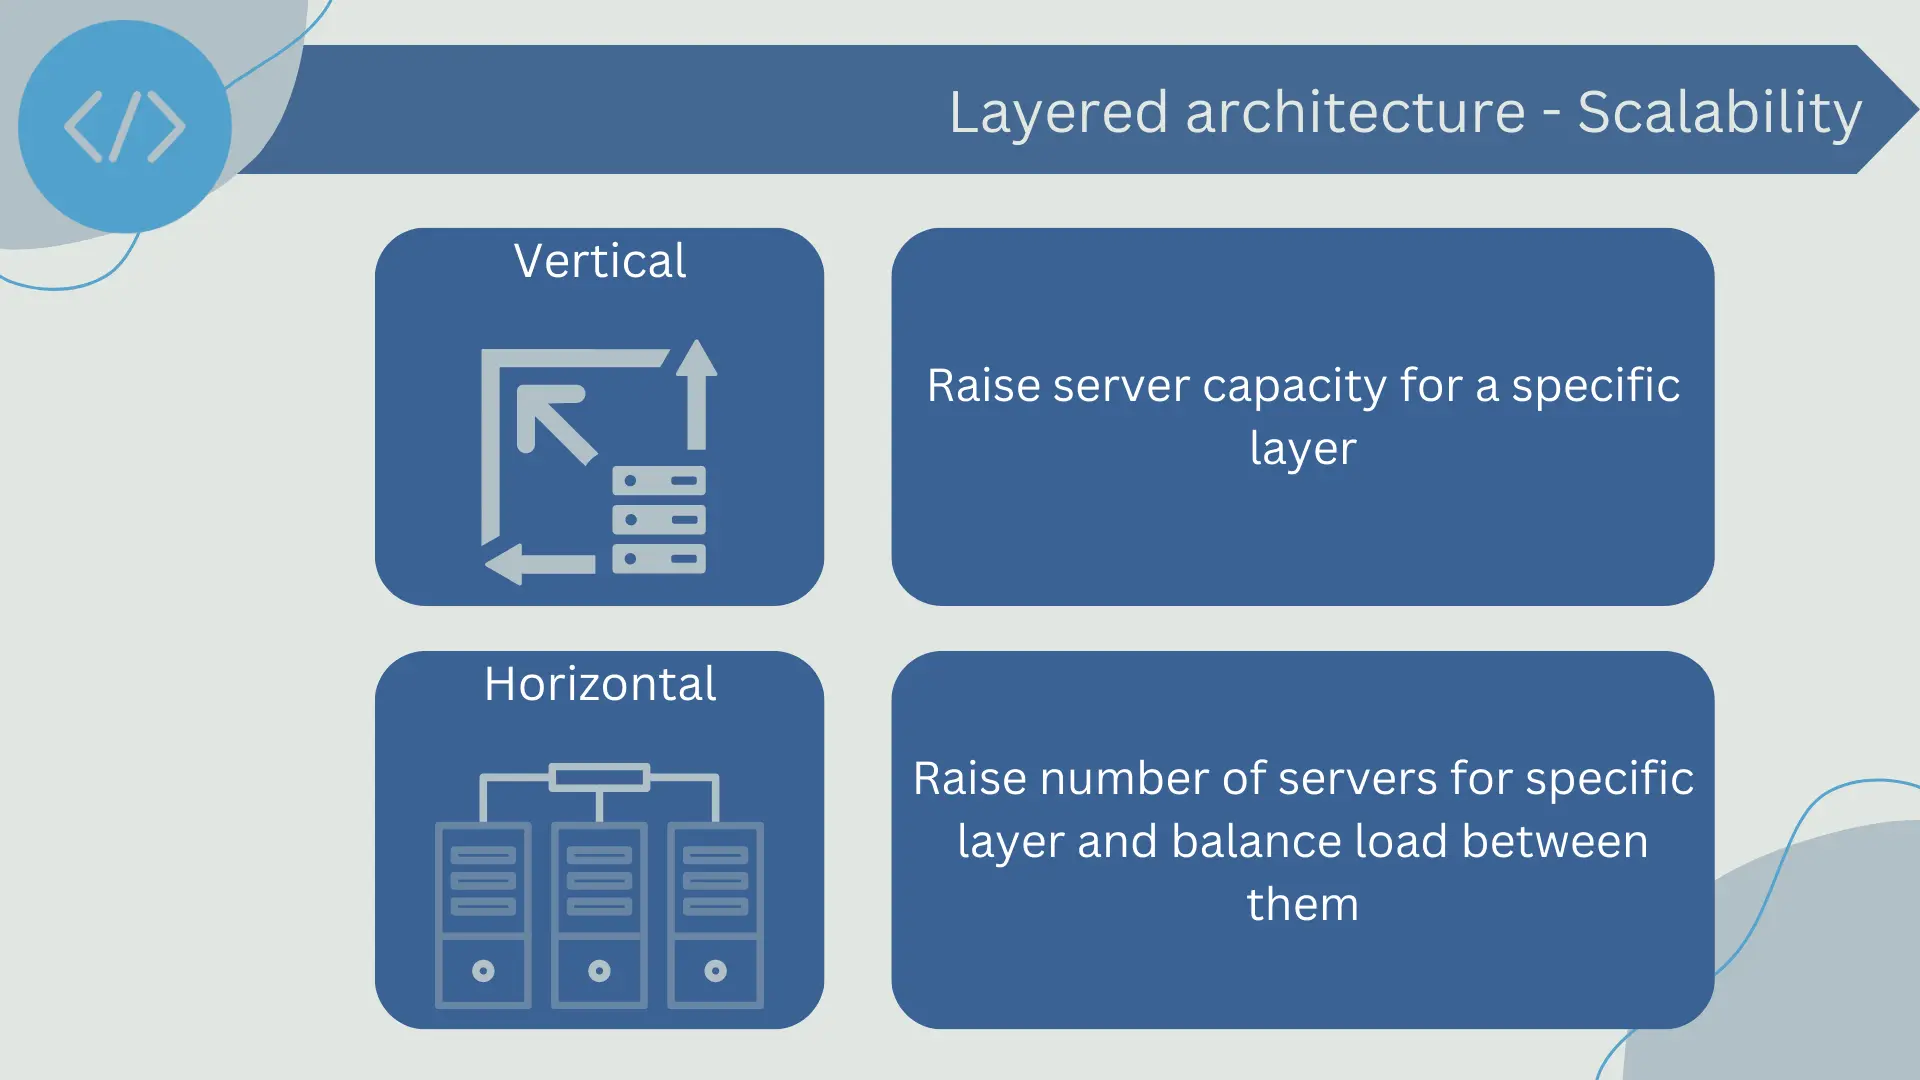 Scalability in layered architecture